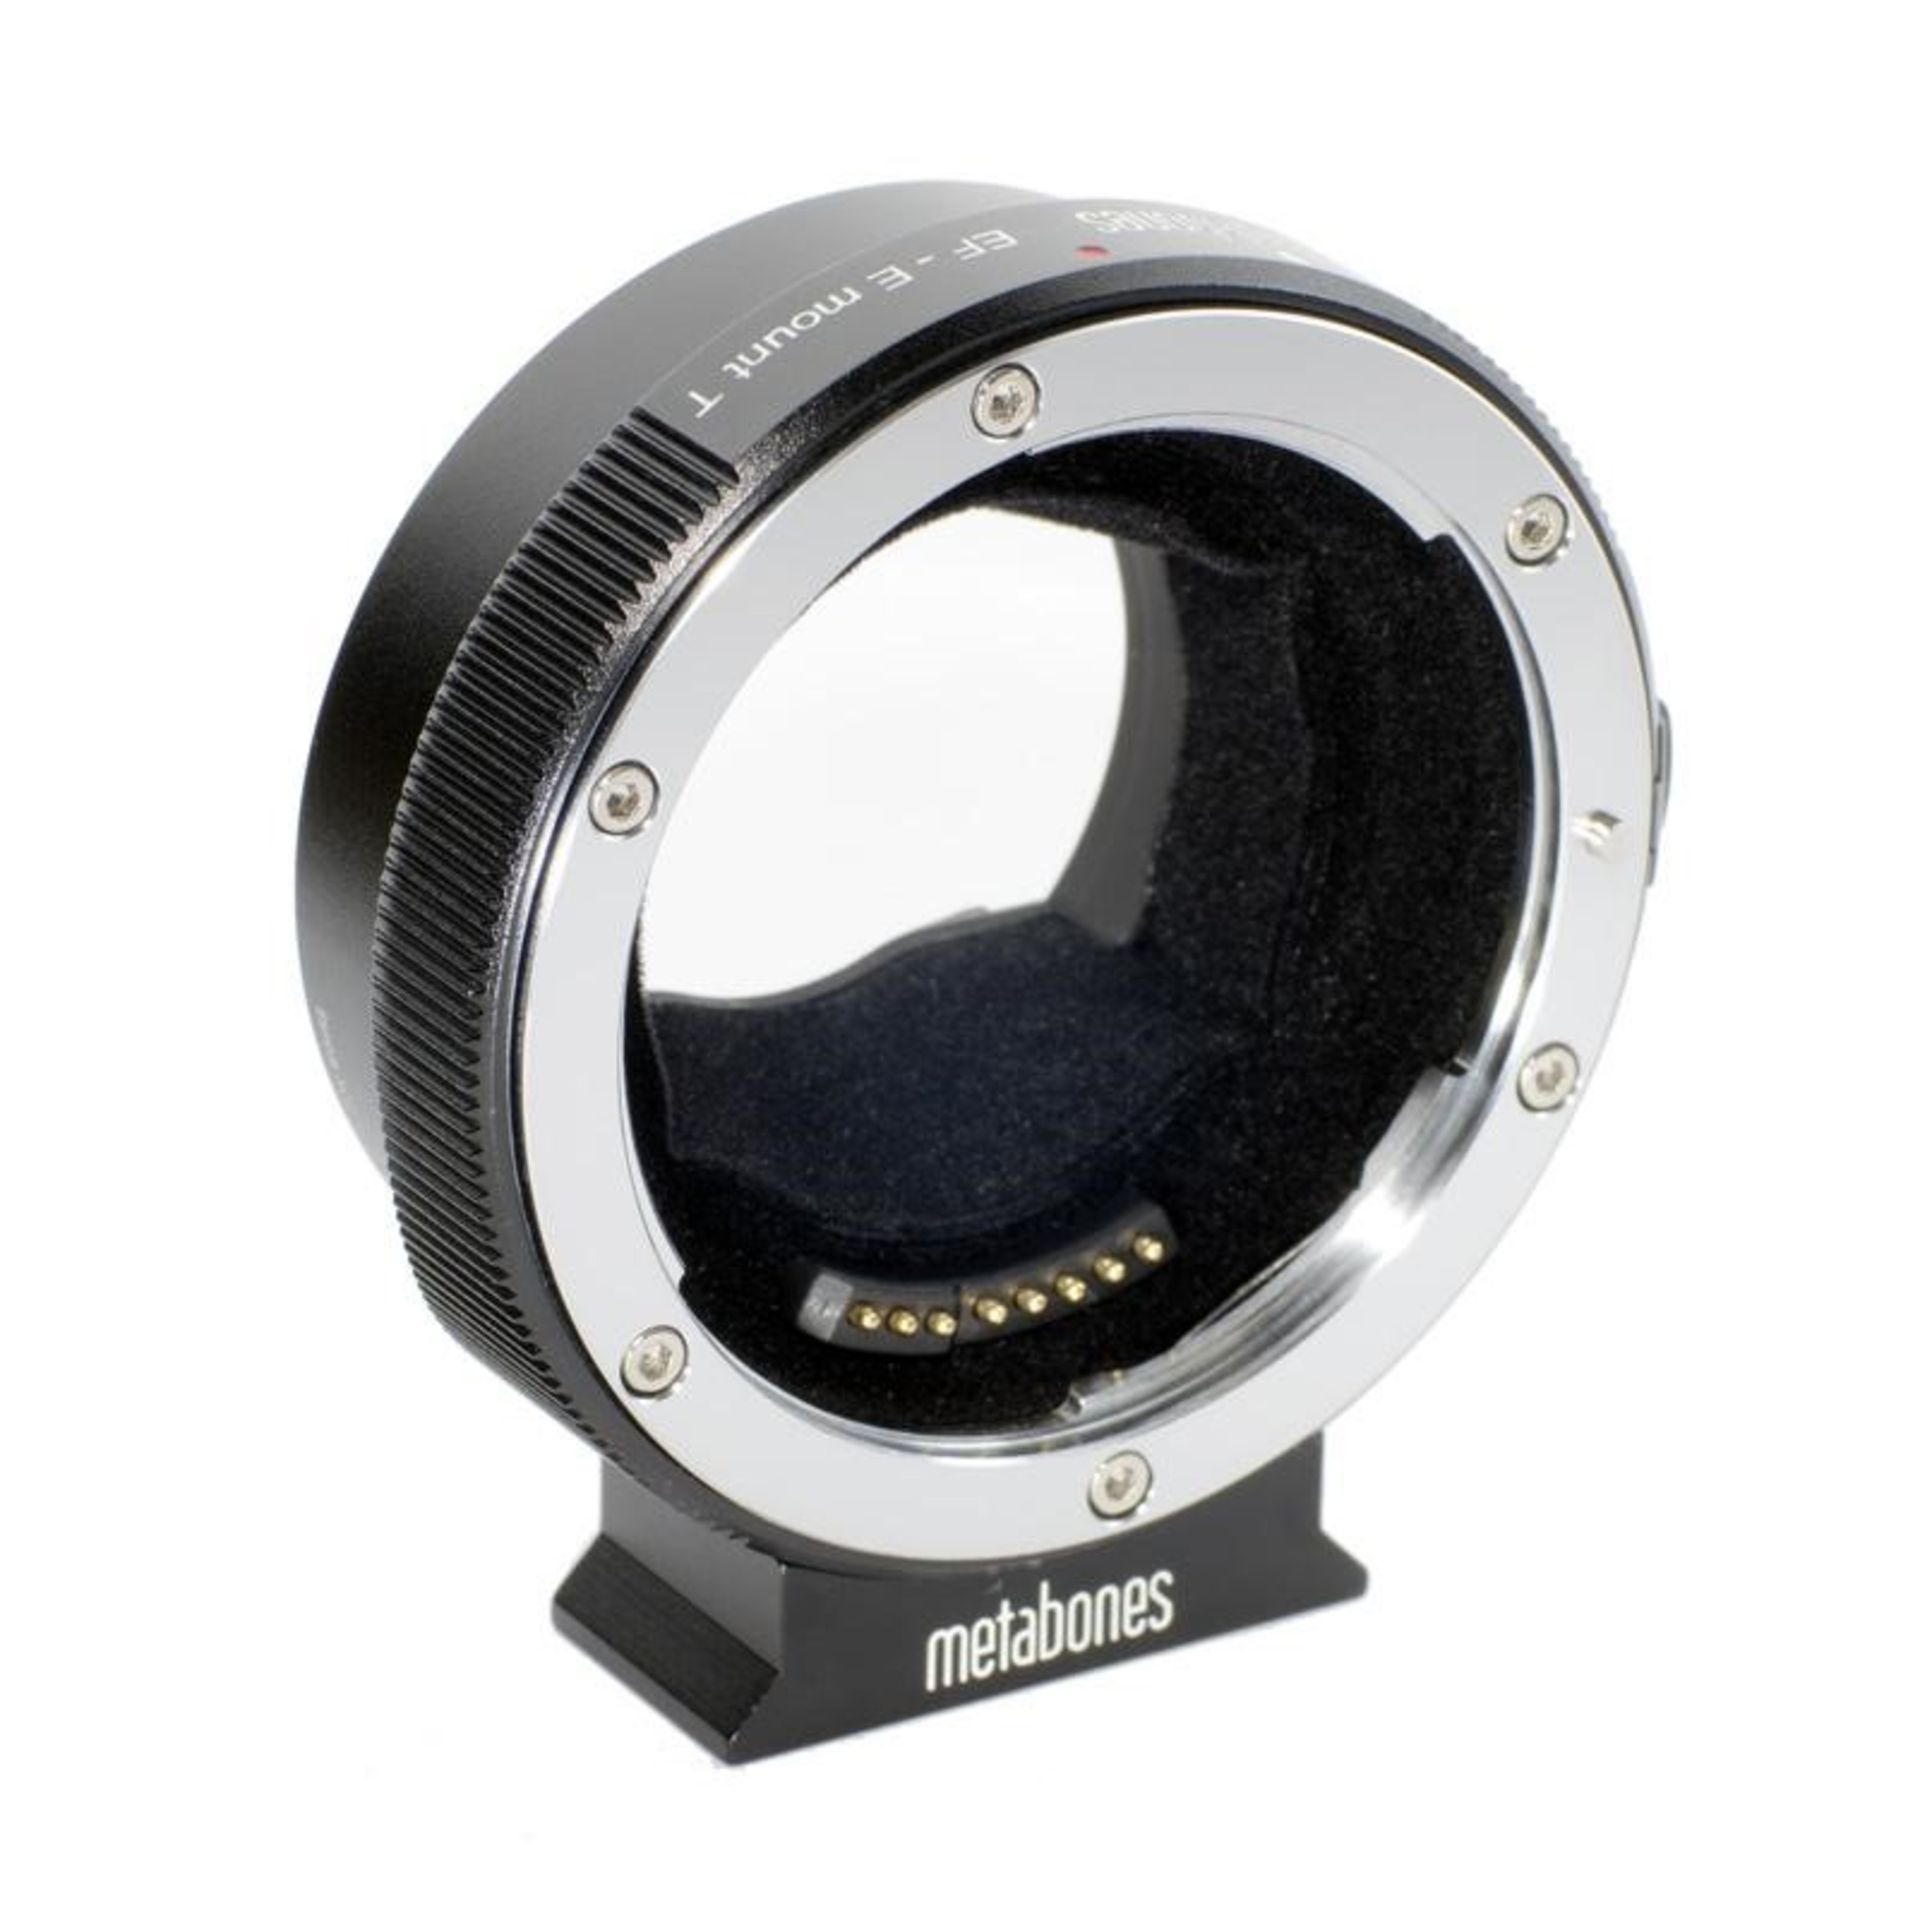 METABONES CANON EF LENS TO SONY E MOUNT T CAMERA ADAPTER (MB EF E BT5) WITH ORIGINAL BOX